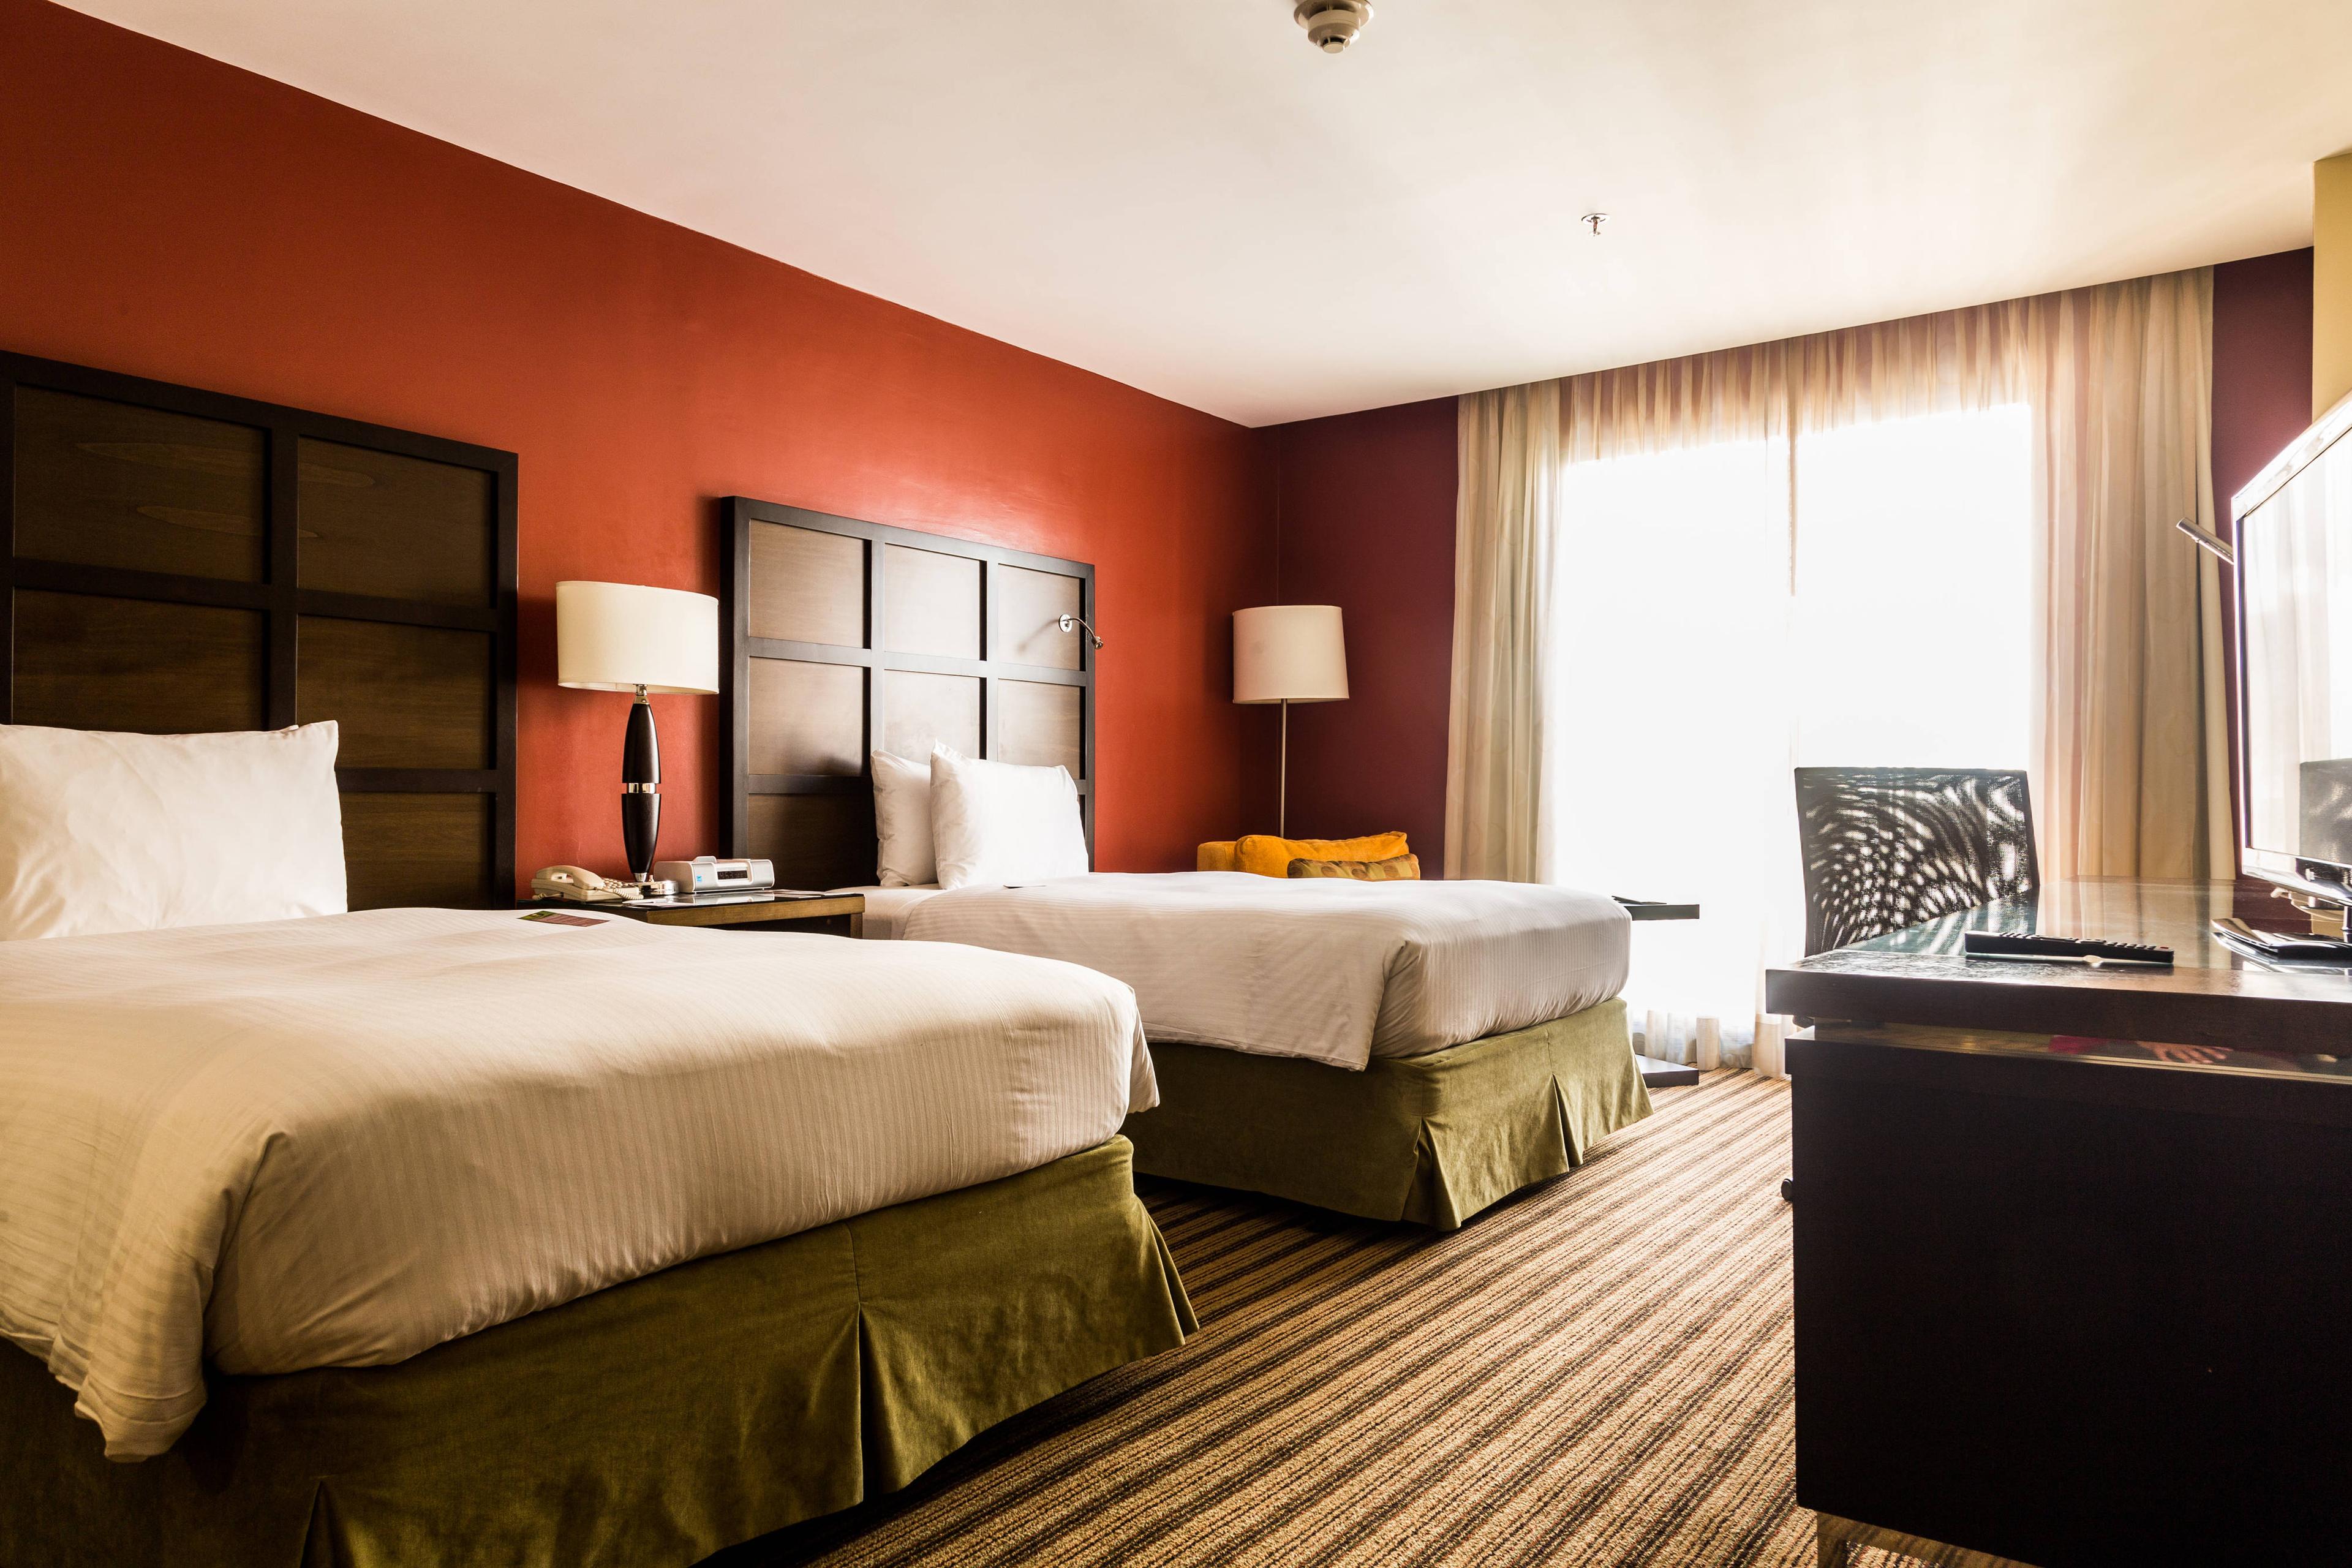 Discover the style and comfort in our spacious rooms with two queen-size king-size beds, ultra-luxurious bedding and pillows, a 42-inch LCD TV, iPod dock and high-speed Internet access.